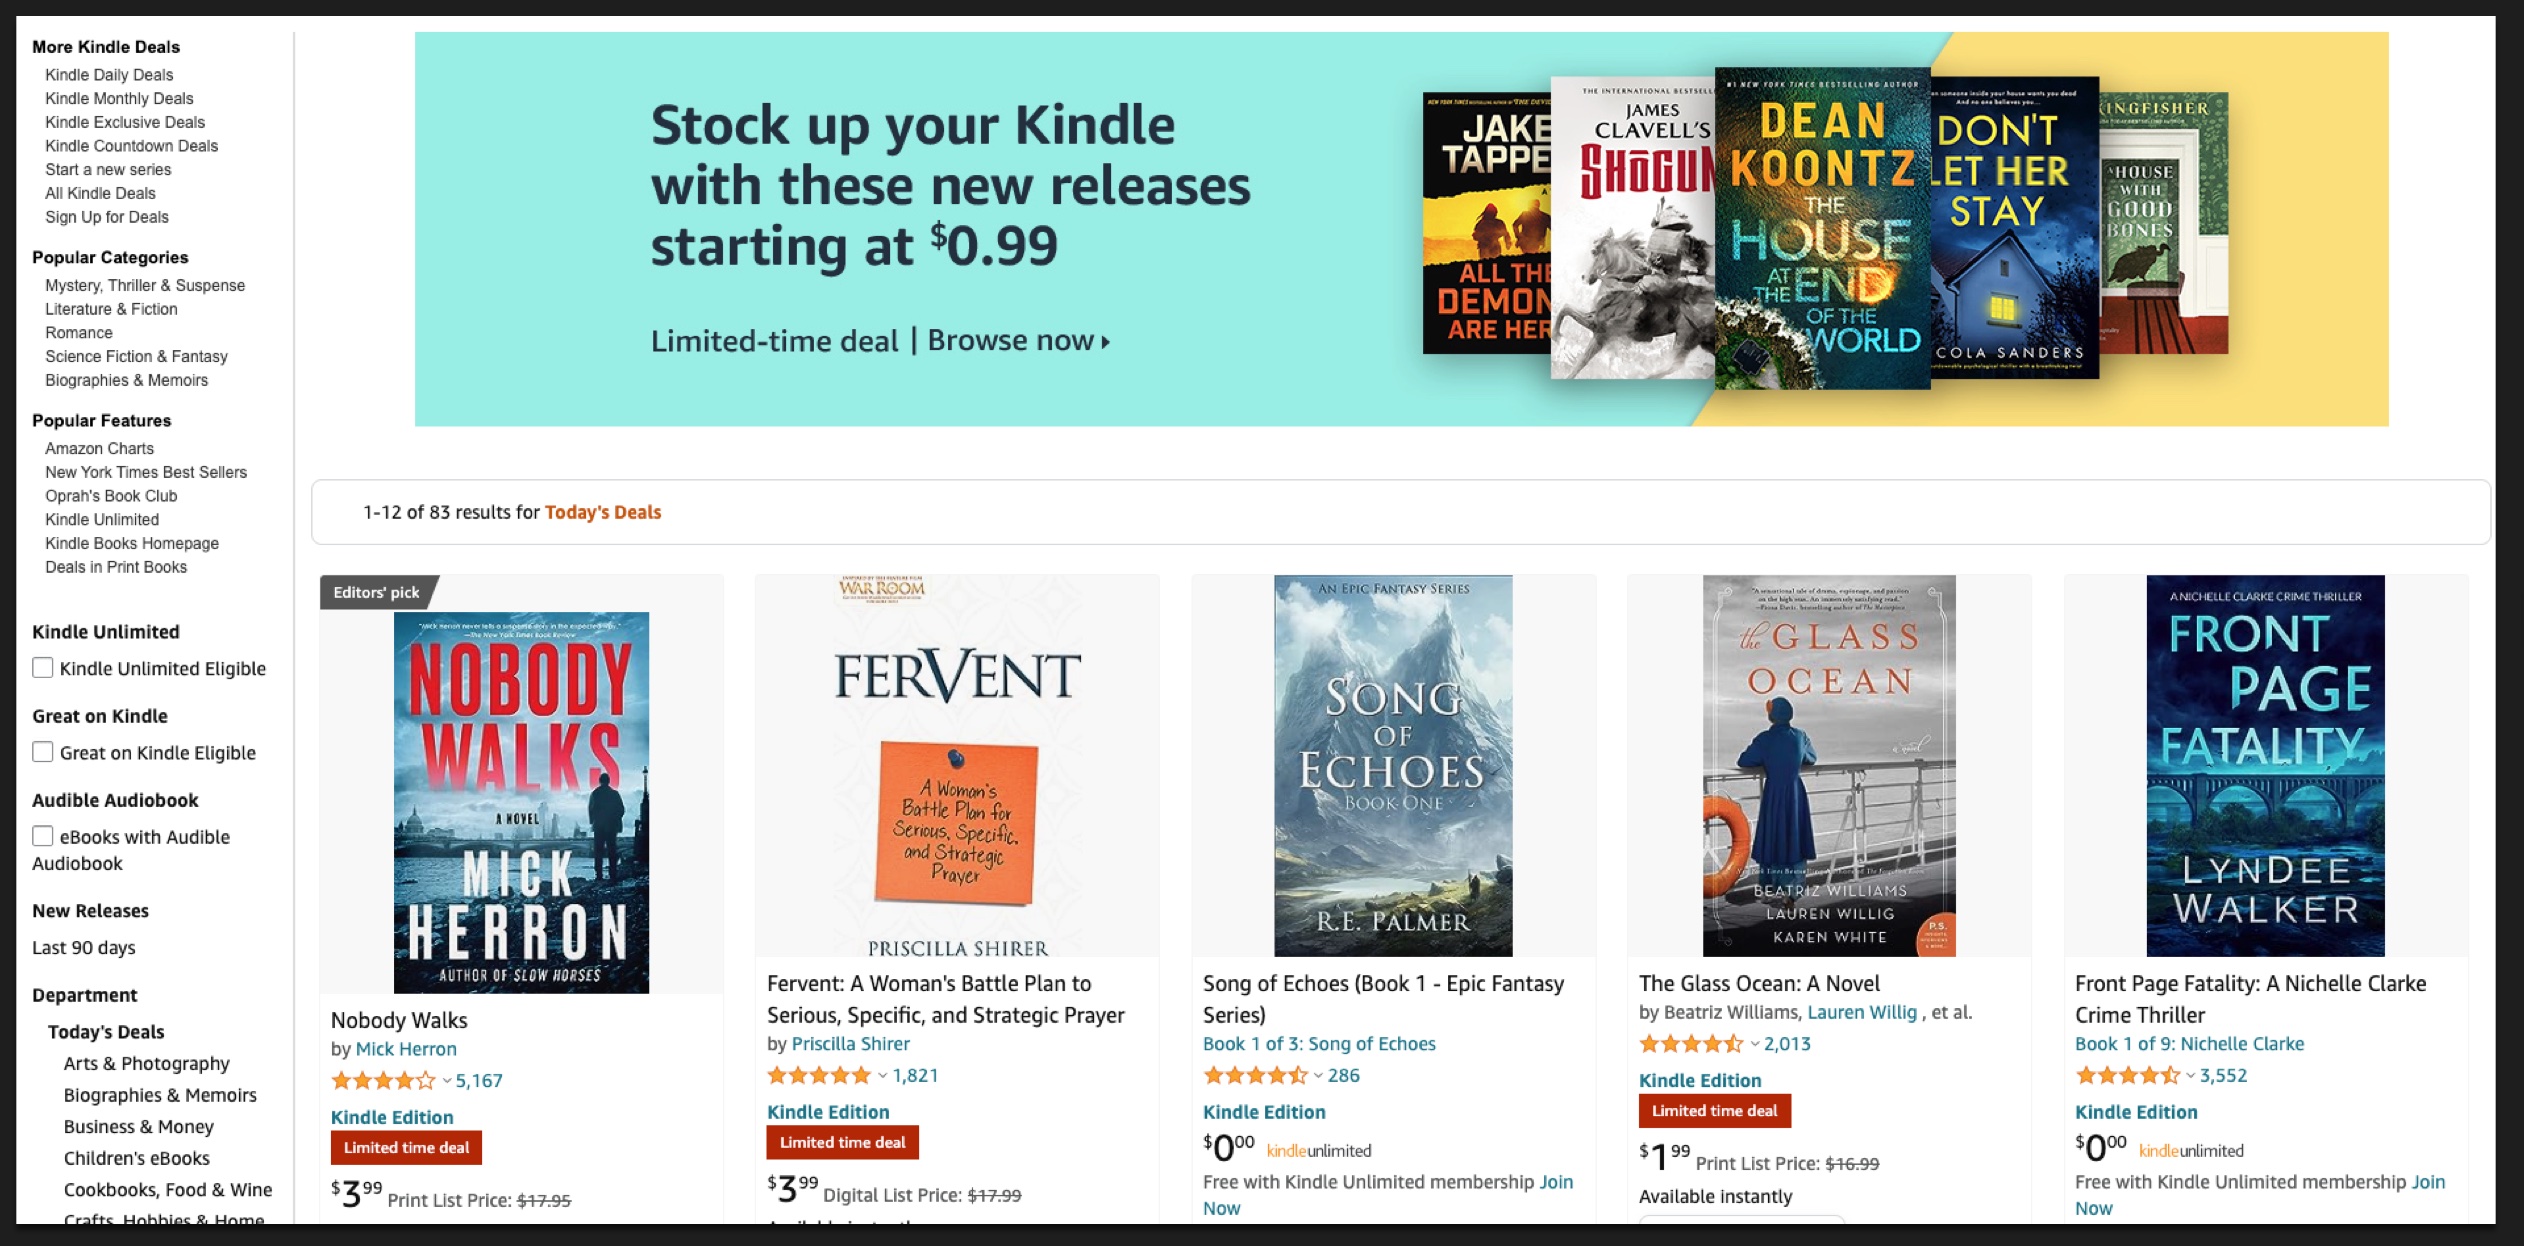 How to Find Kindle Daily Deals - Step 6